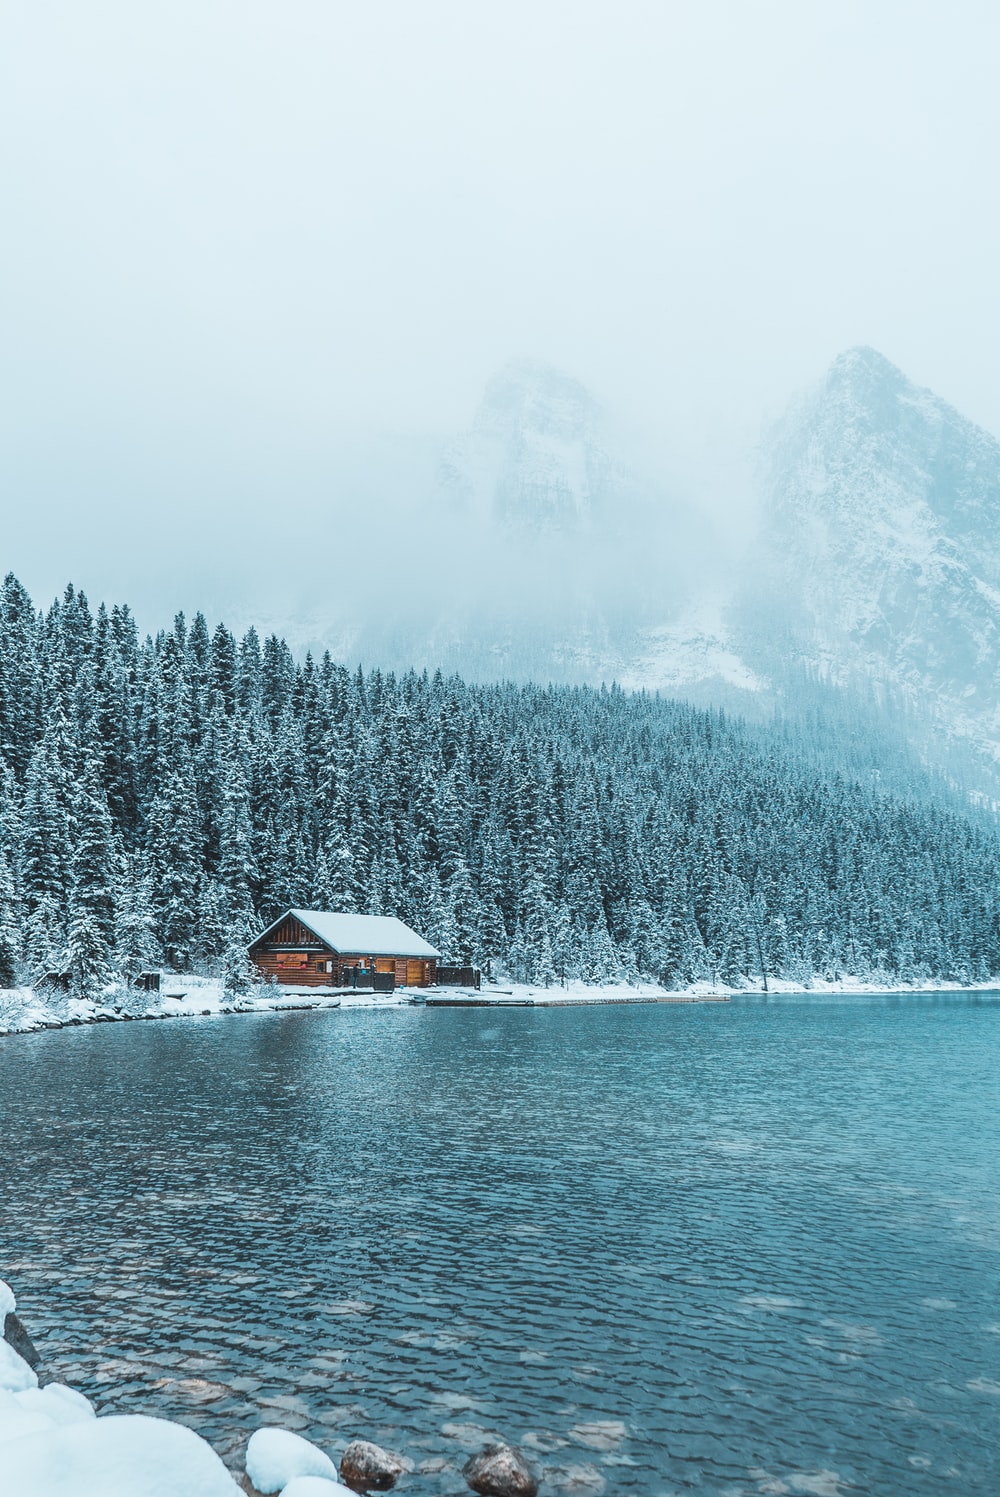 Winter Lake Picture. Download Free Image